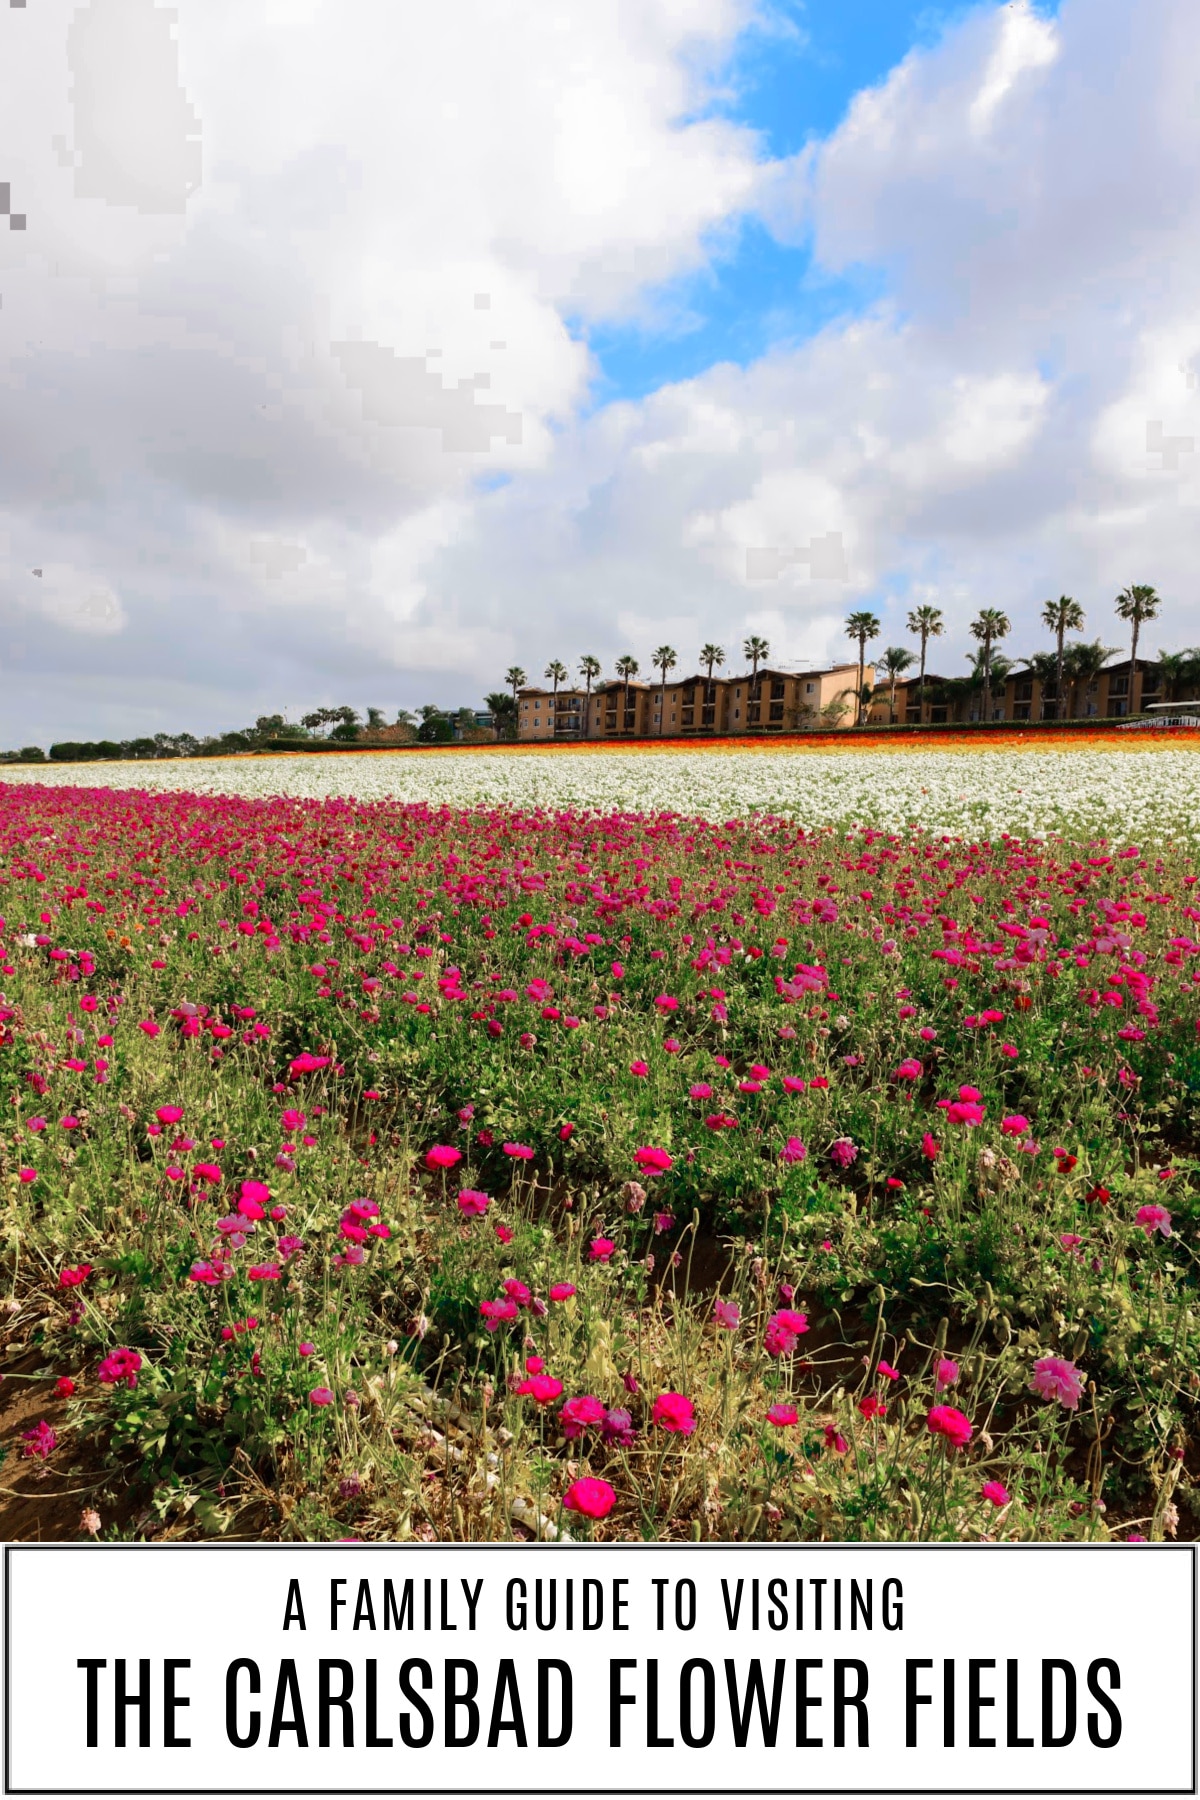 The Carlsbad Flower Fields have flowers blooming from March to May each year. Here's everything you need to plan a visit with your family. via @somewhatsimple